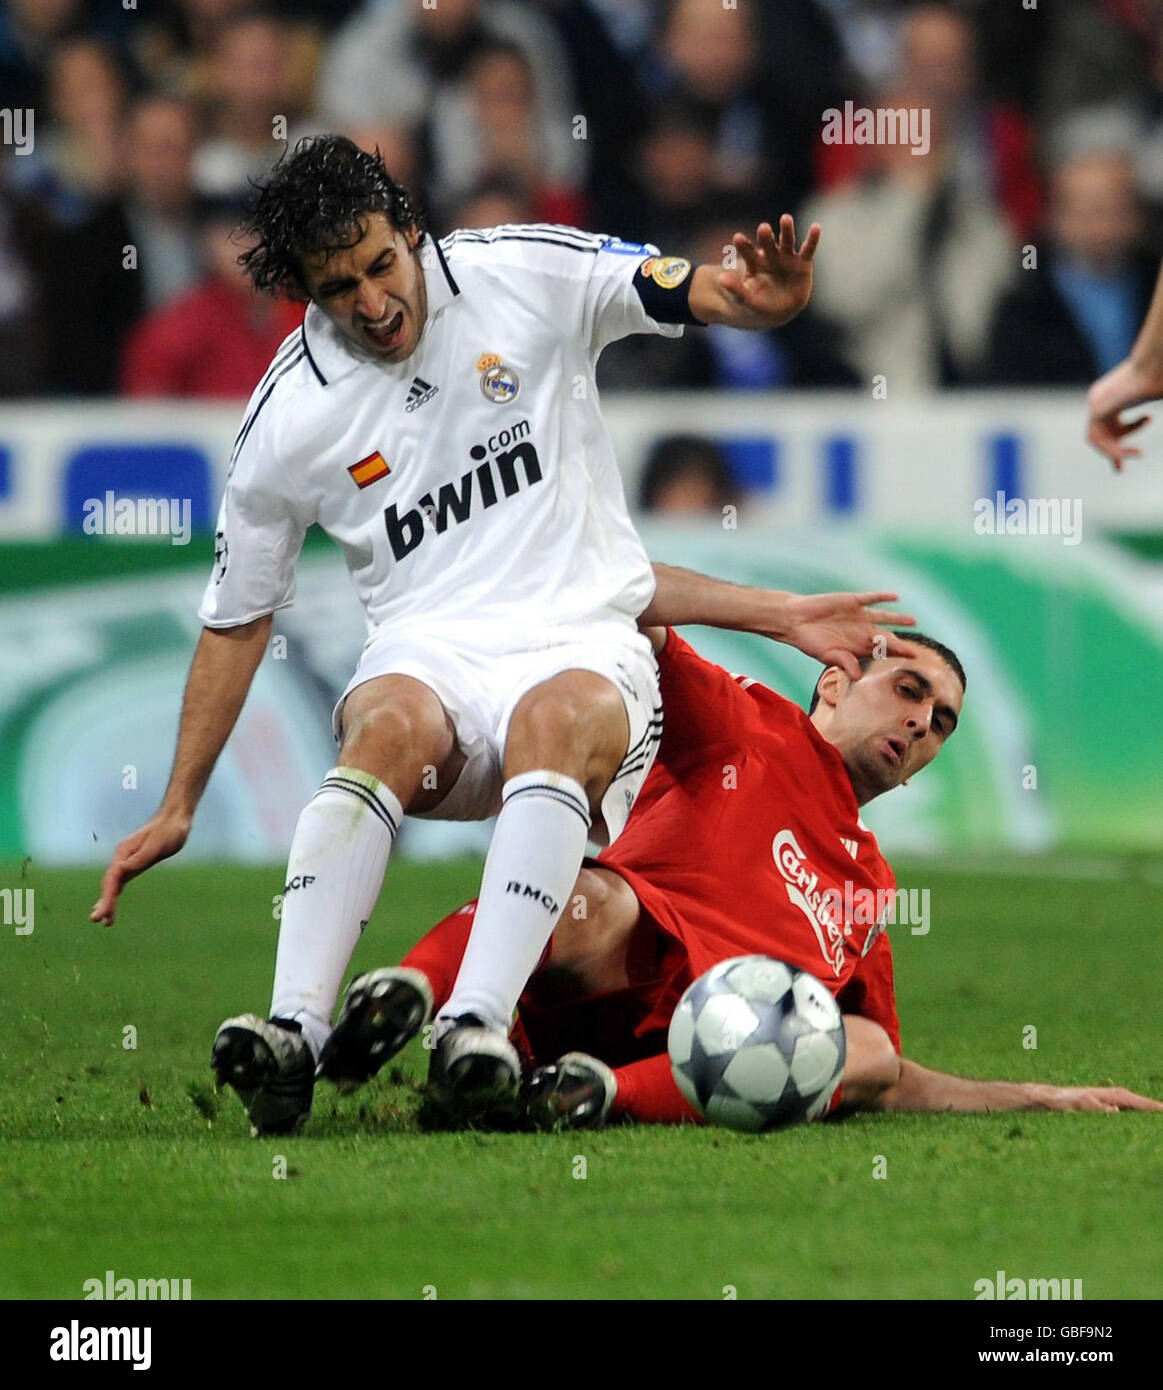 Liverpool's Alvaro Arbeloa (right) and Real Madrid Gonzalez Raul (left) battle for the ball during the UEFA Champions League match at the Santiago Bernabeu, Madrid, Spain. Stock Photo